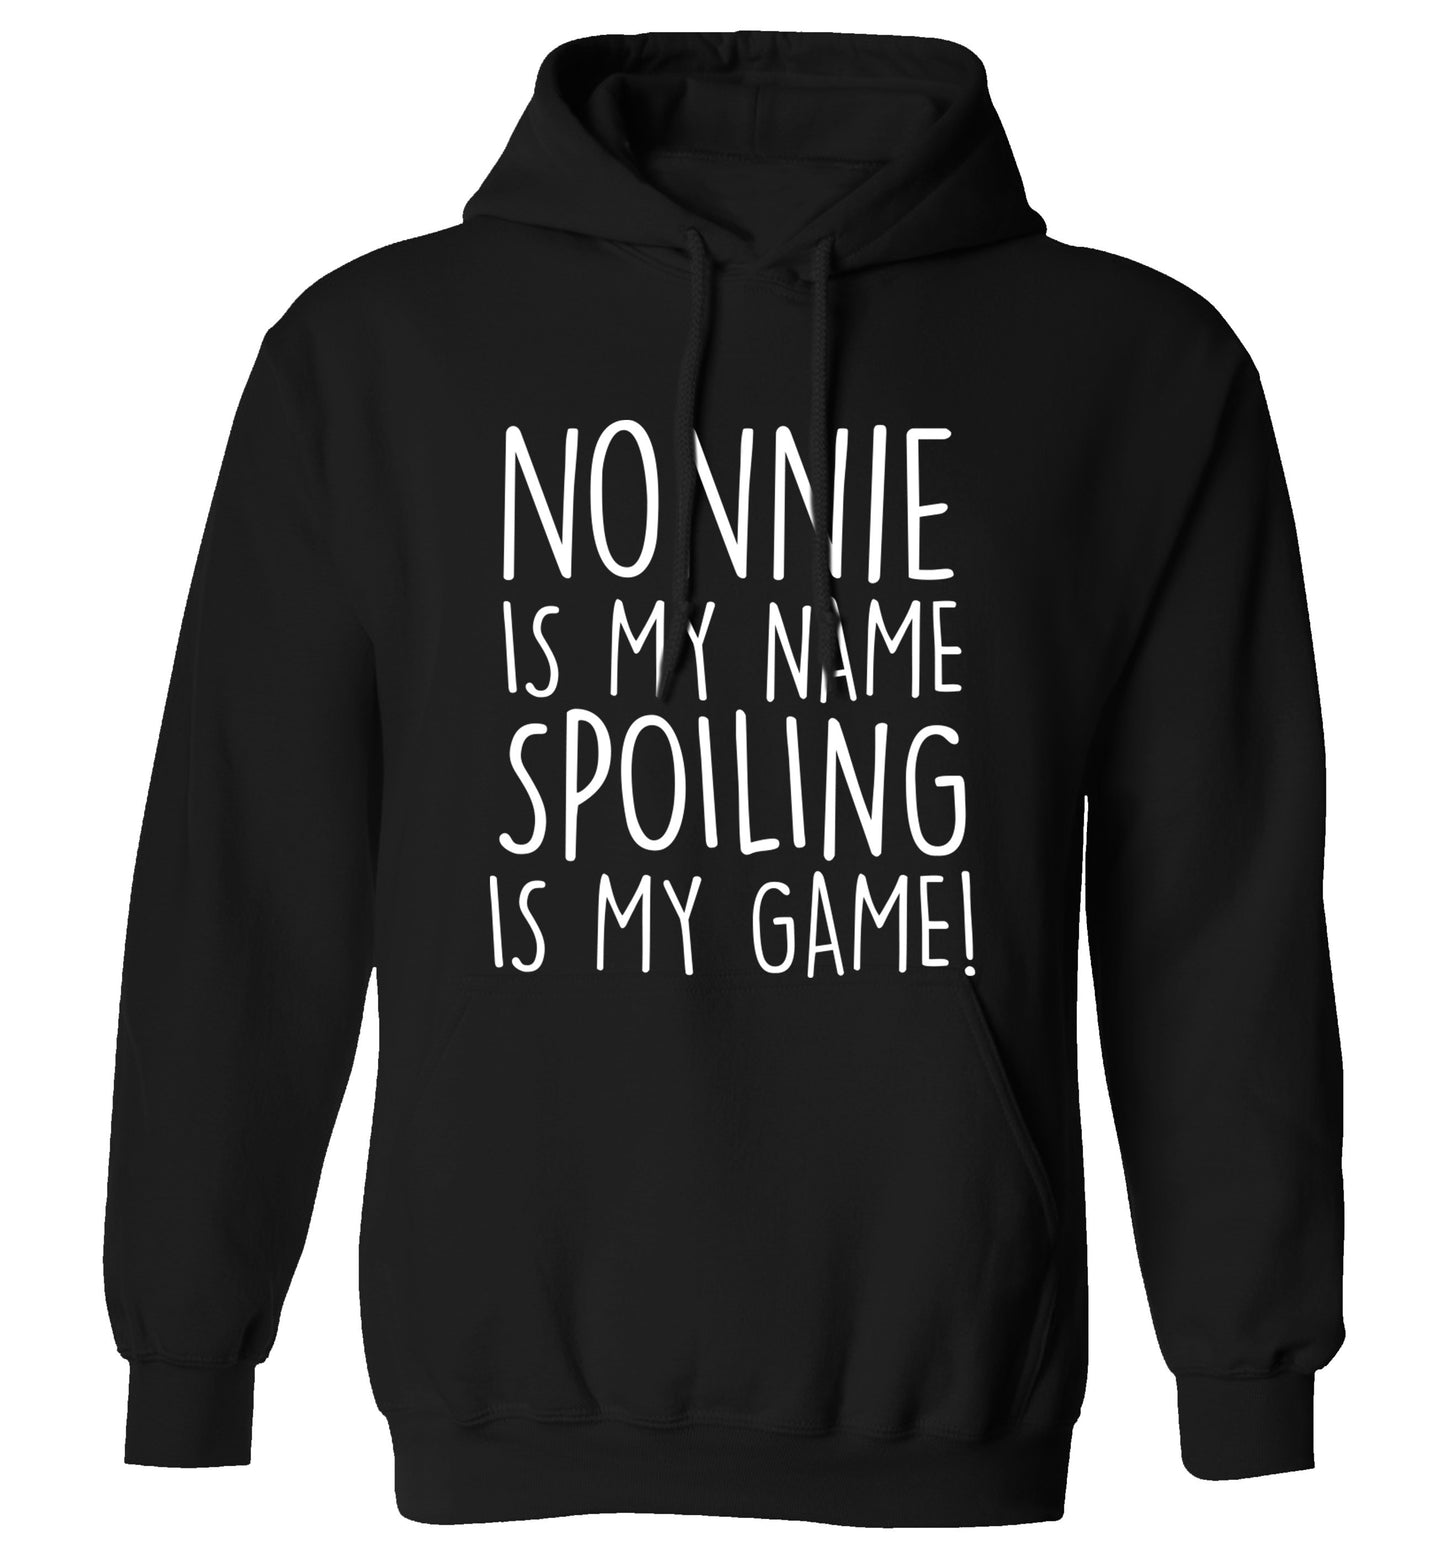 Nonnie is my name, spoiling is my game adults unisex black hoodie 2XL